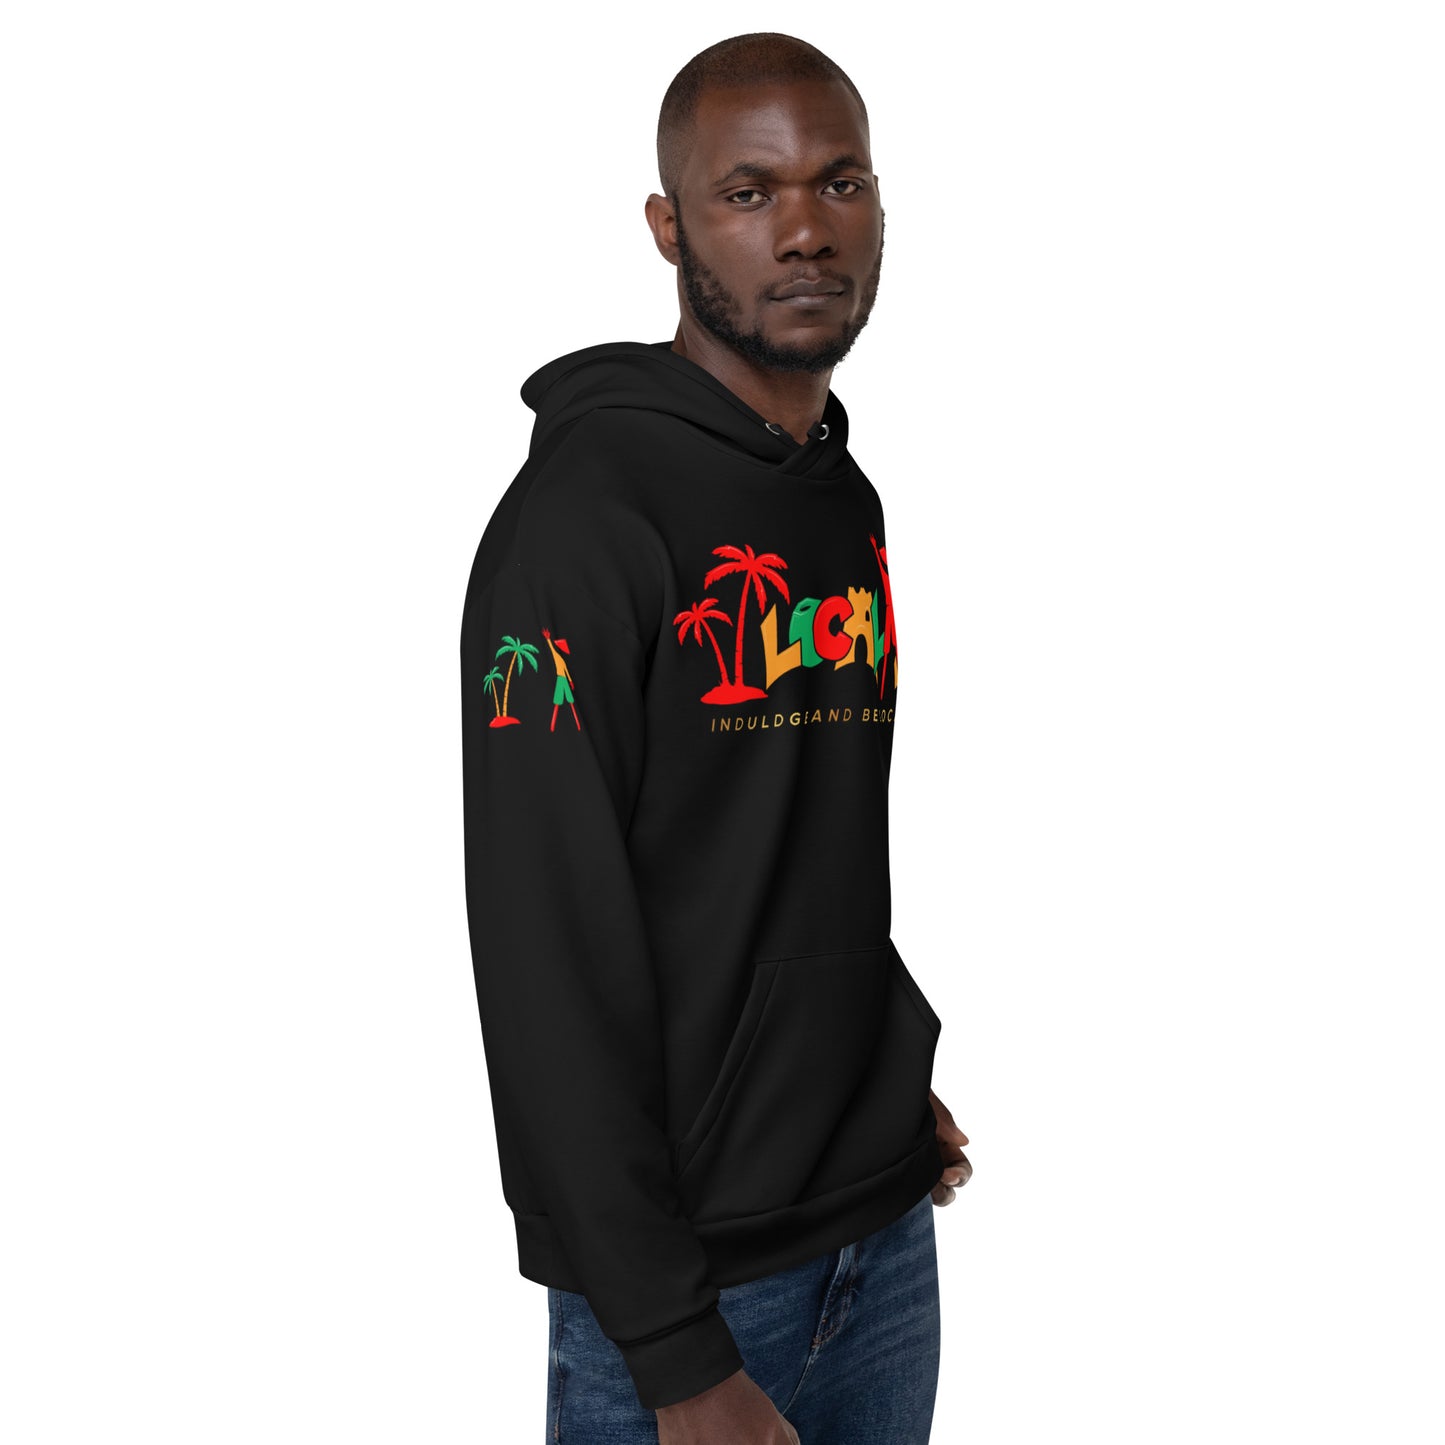 V.Localized Black (Ice/Gold/Green) Unisex Hoodie